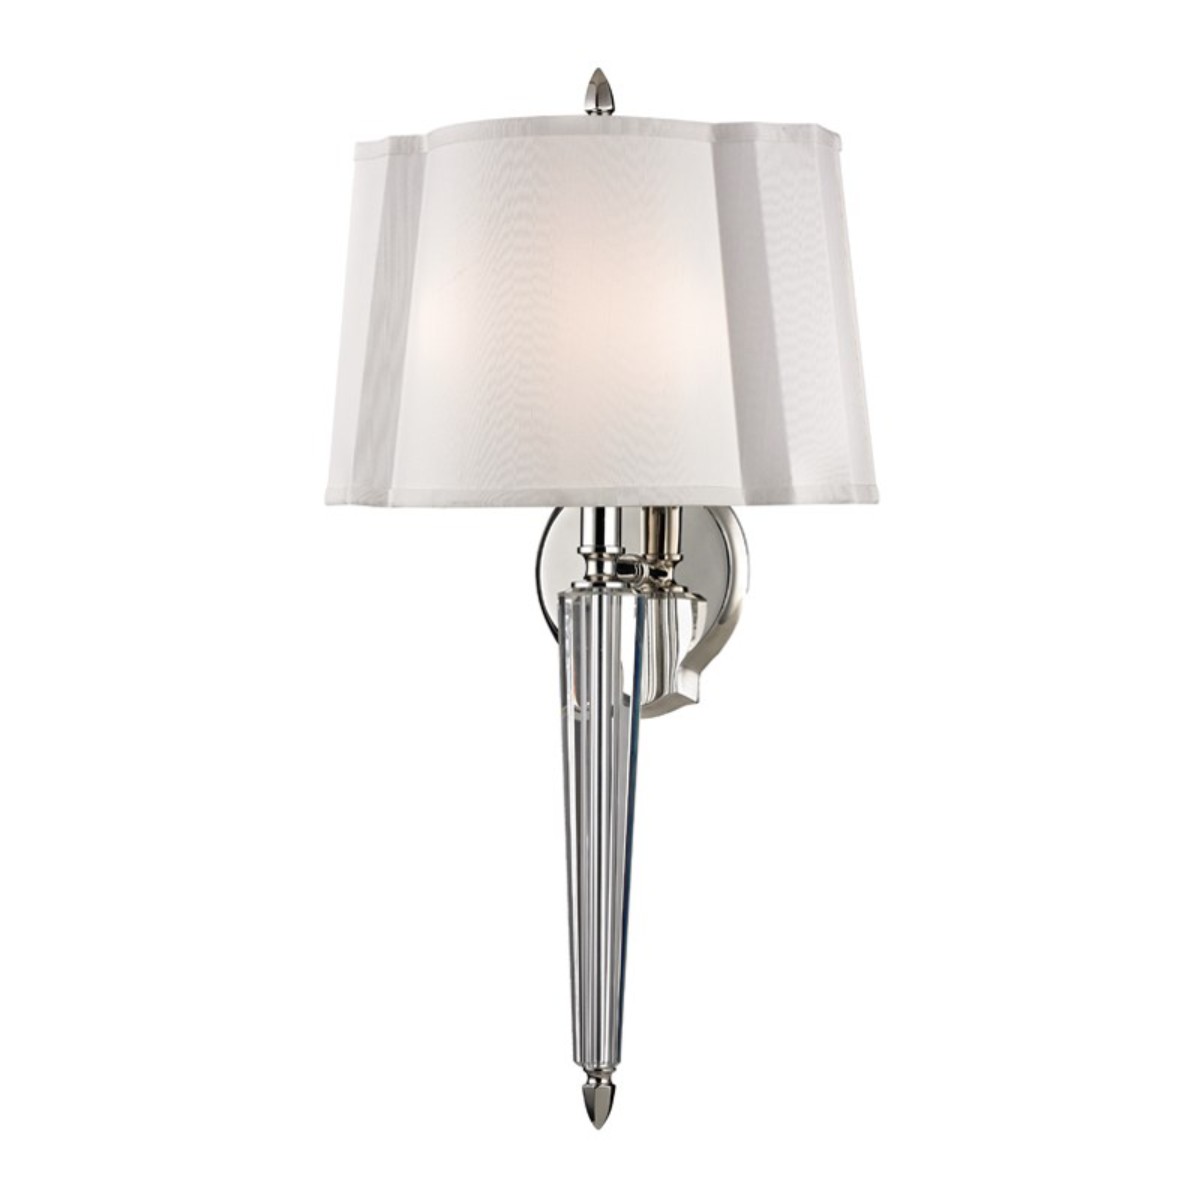 Hudson Valley I Oyster Bay Wall Sconce I Polished Nickel